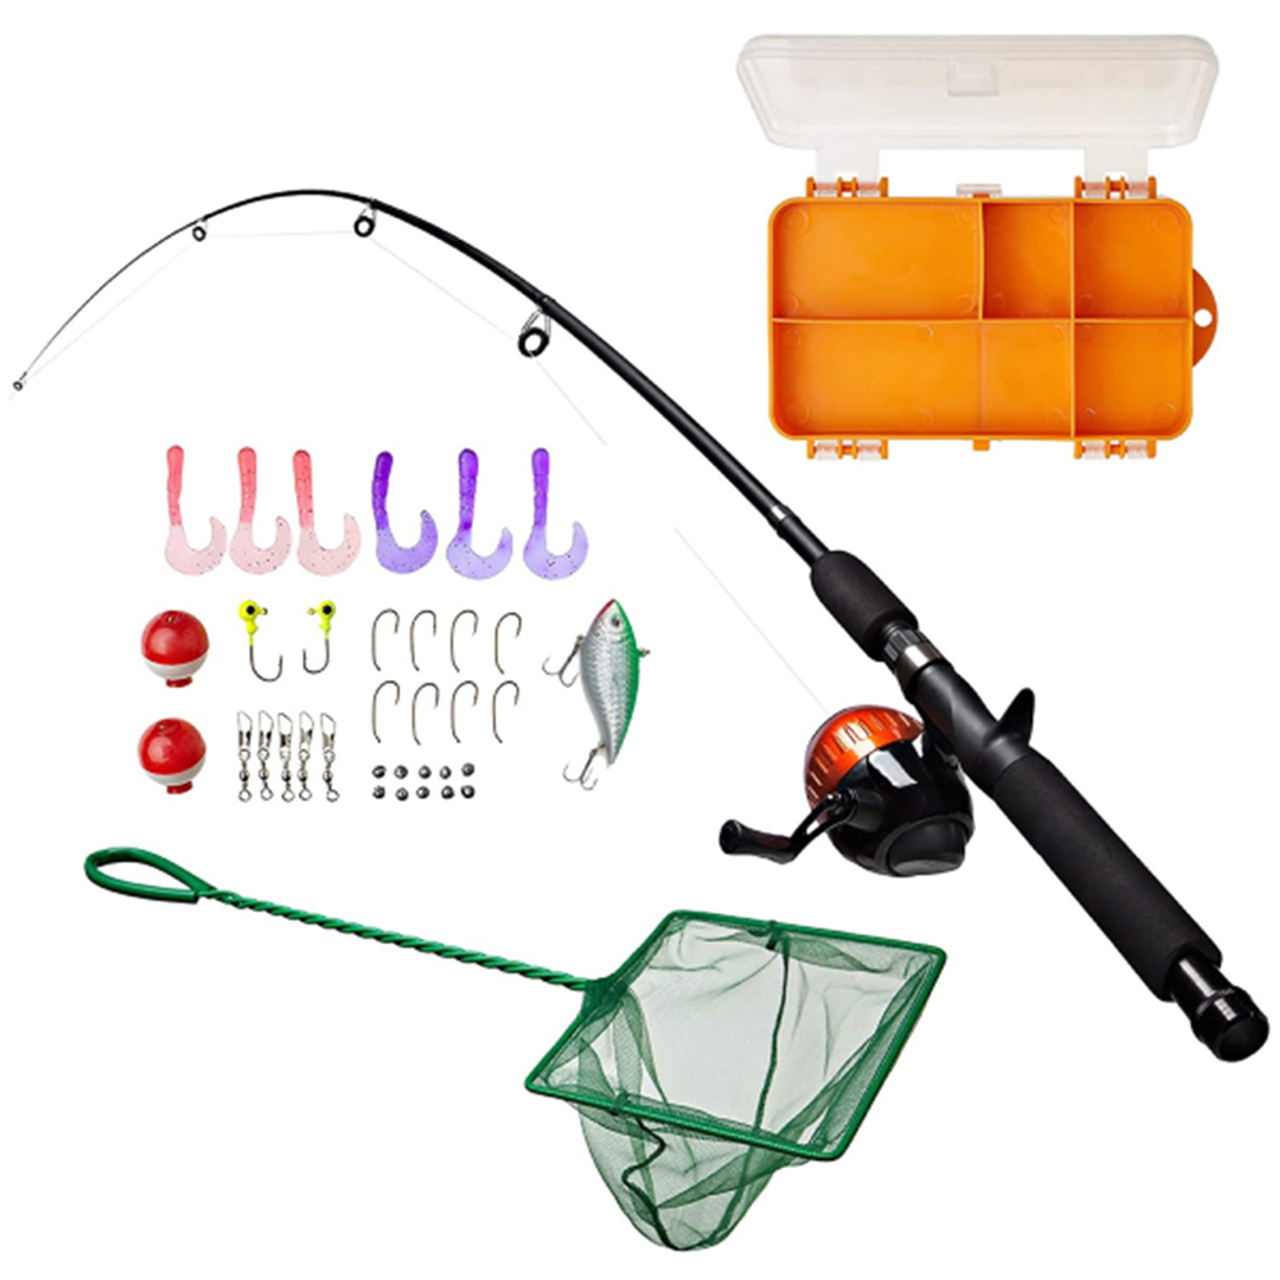 Kids' Fishing Kit with 17-Inch Fishing Rod - Pick Your Plum